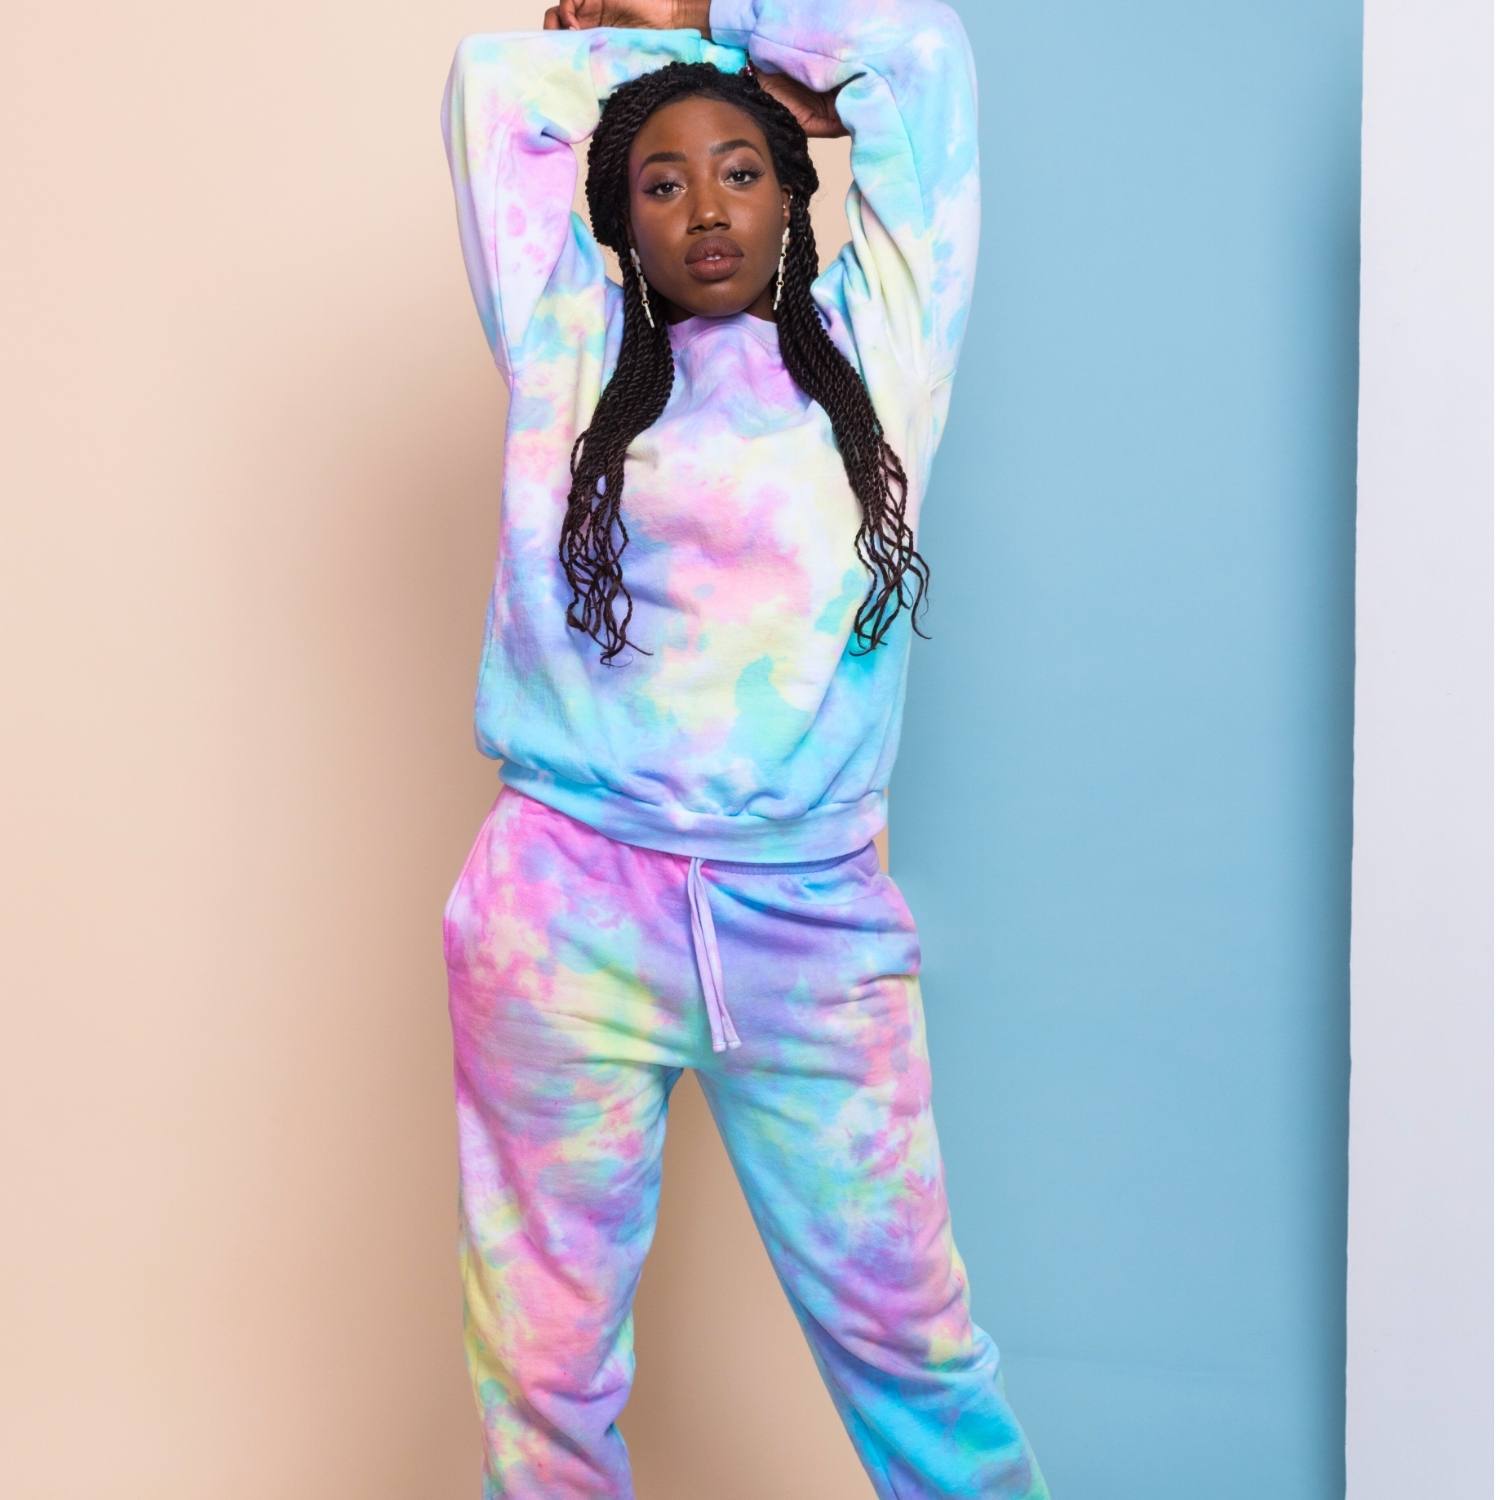 http://mashaapparel.com/cdn/shop/files/Woman-stretching-arms-in-pastel-tie-dye-sweatsuit-against-blue-and-peach-background.jpg?v=1706039115